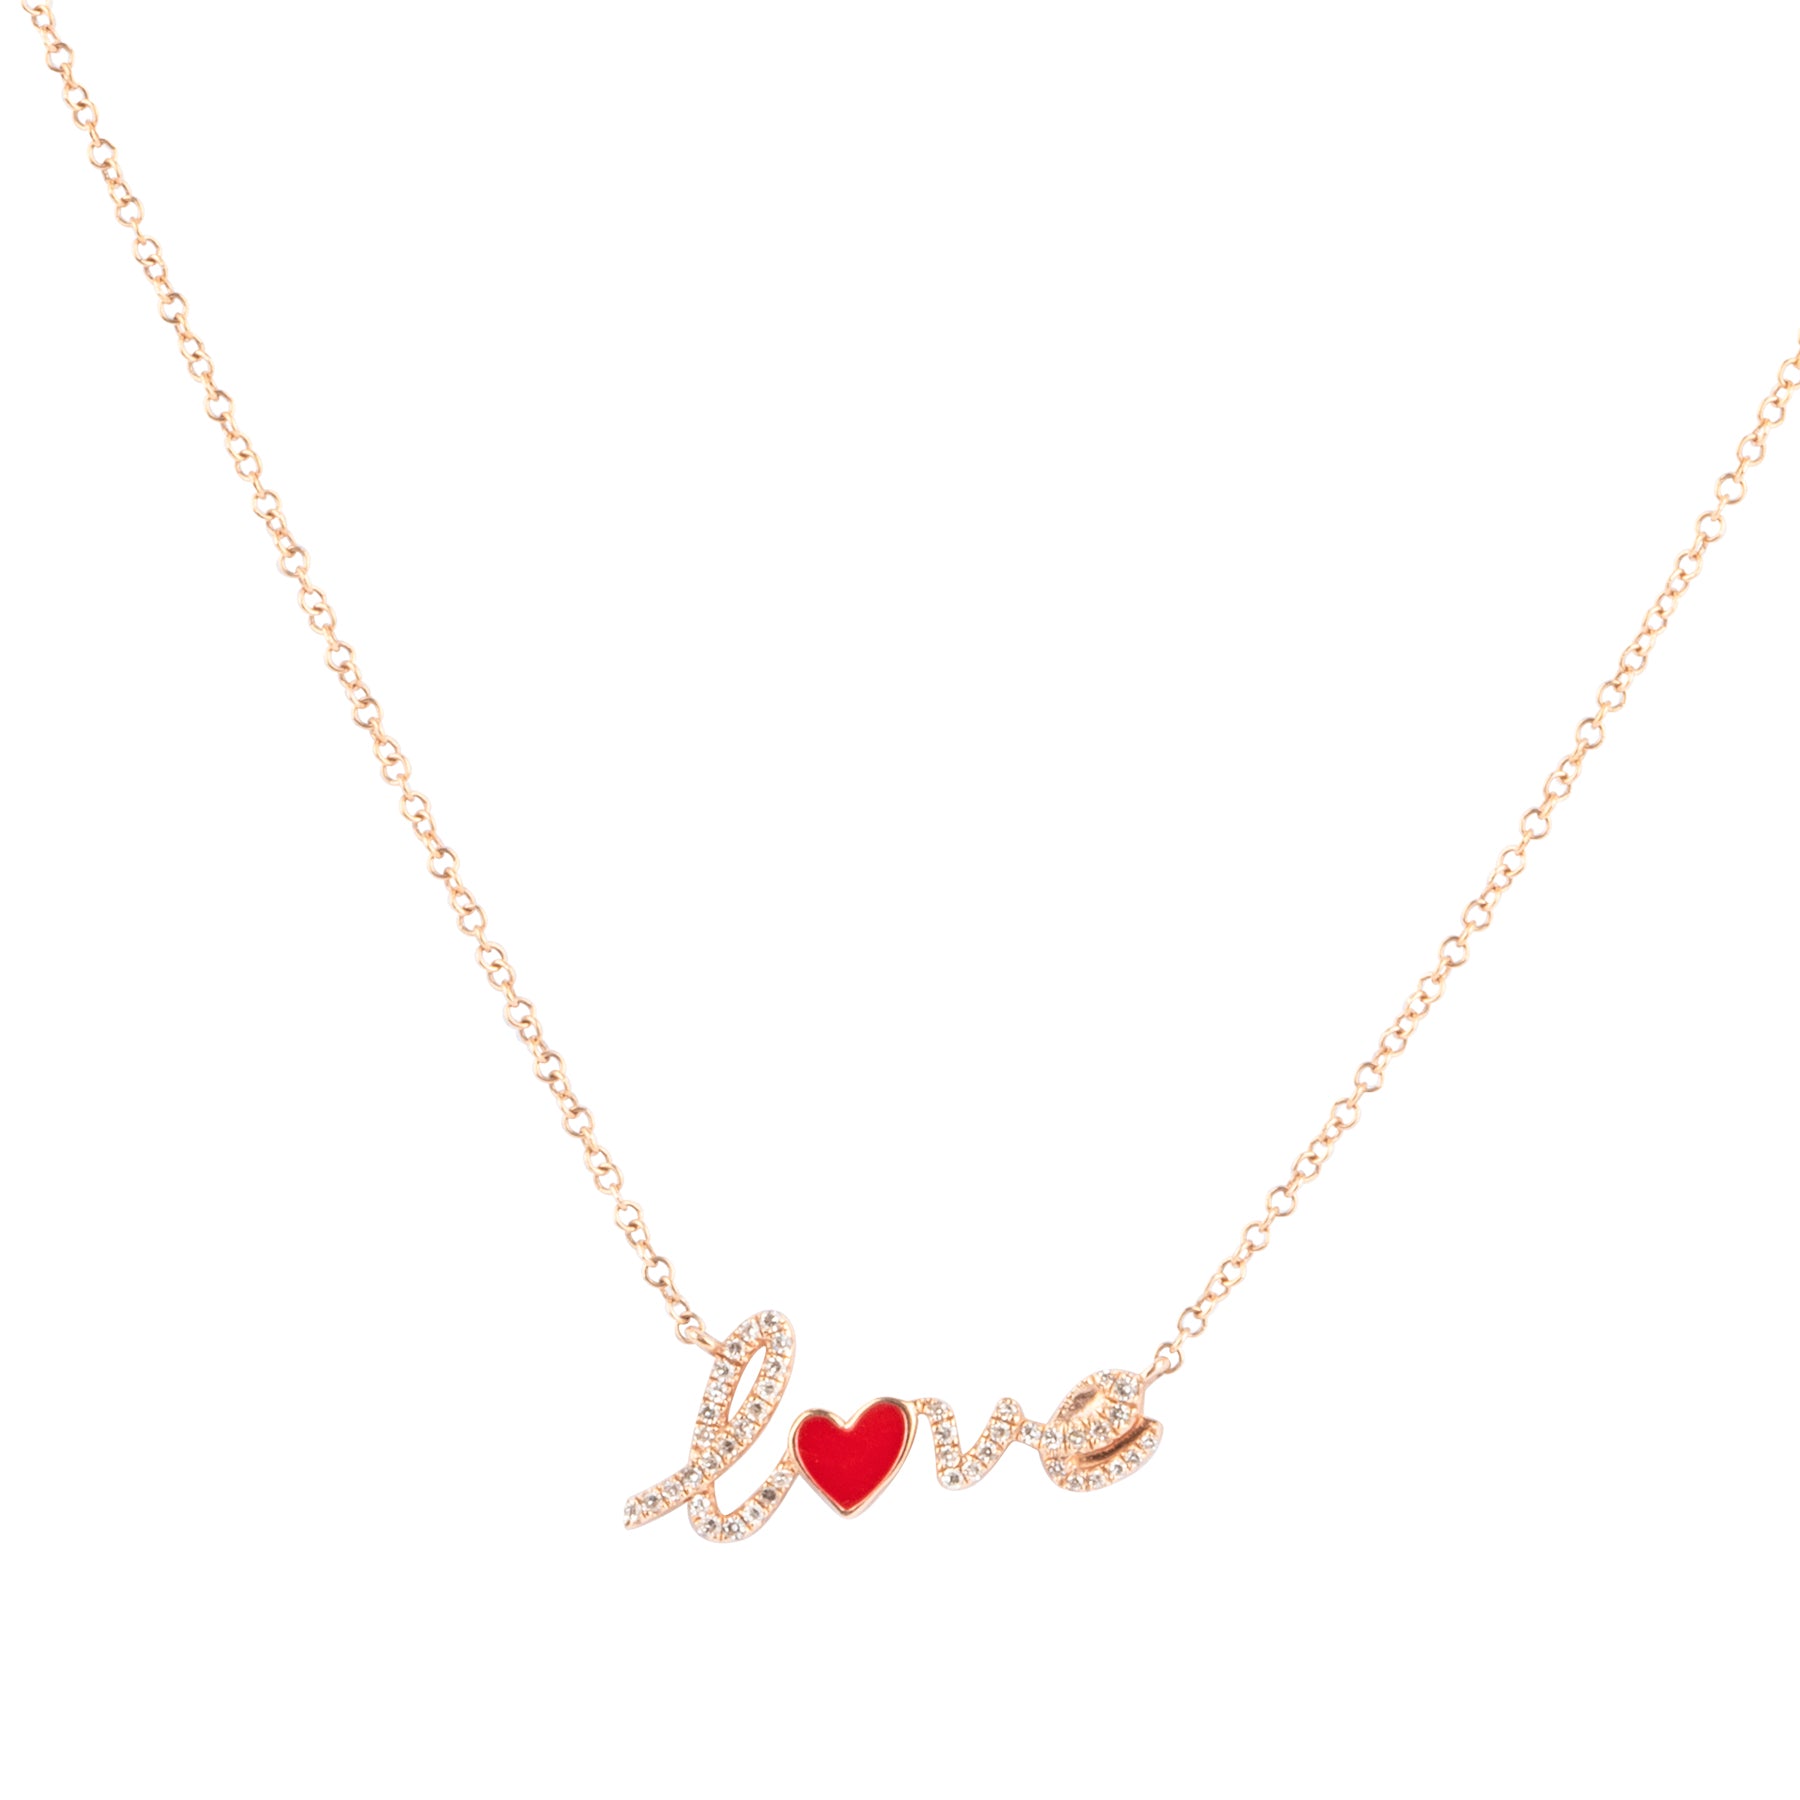 Diamond Love Necklace with Red Enamel Heart - Nina Segal Jewelry